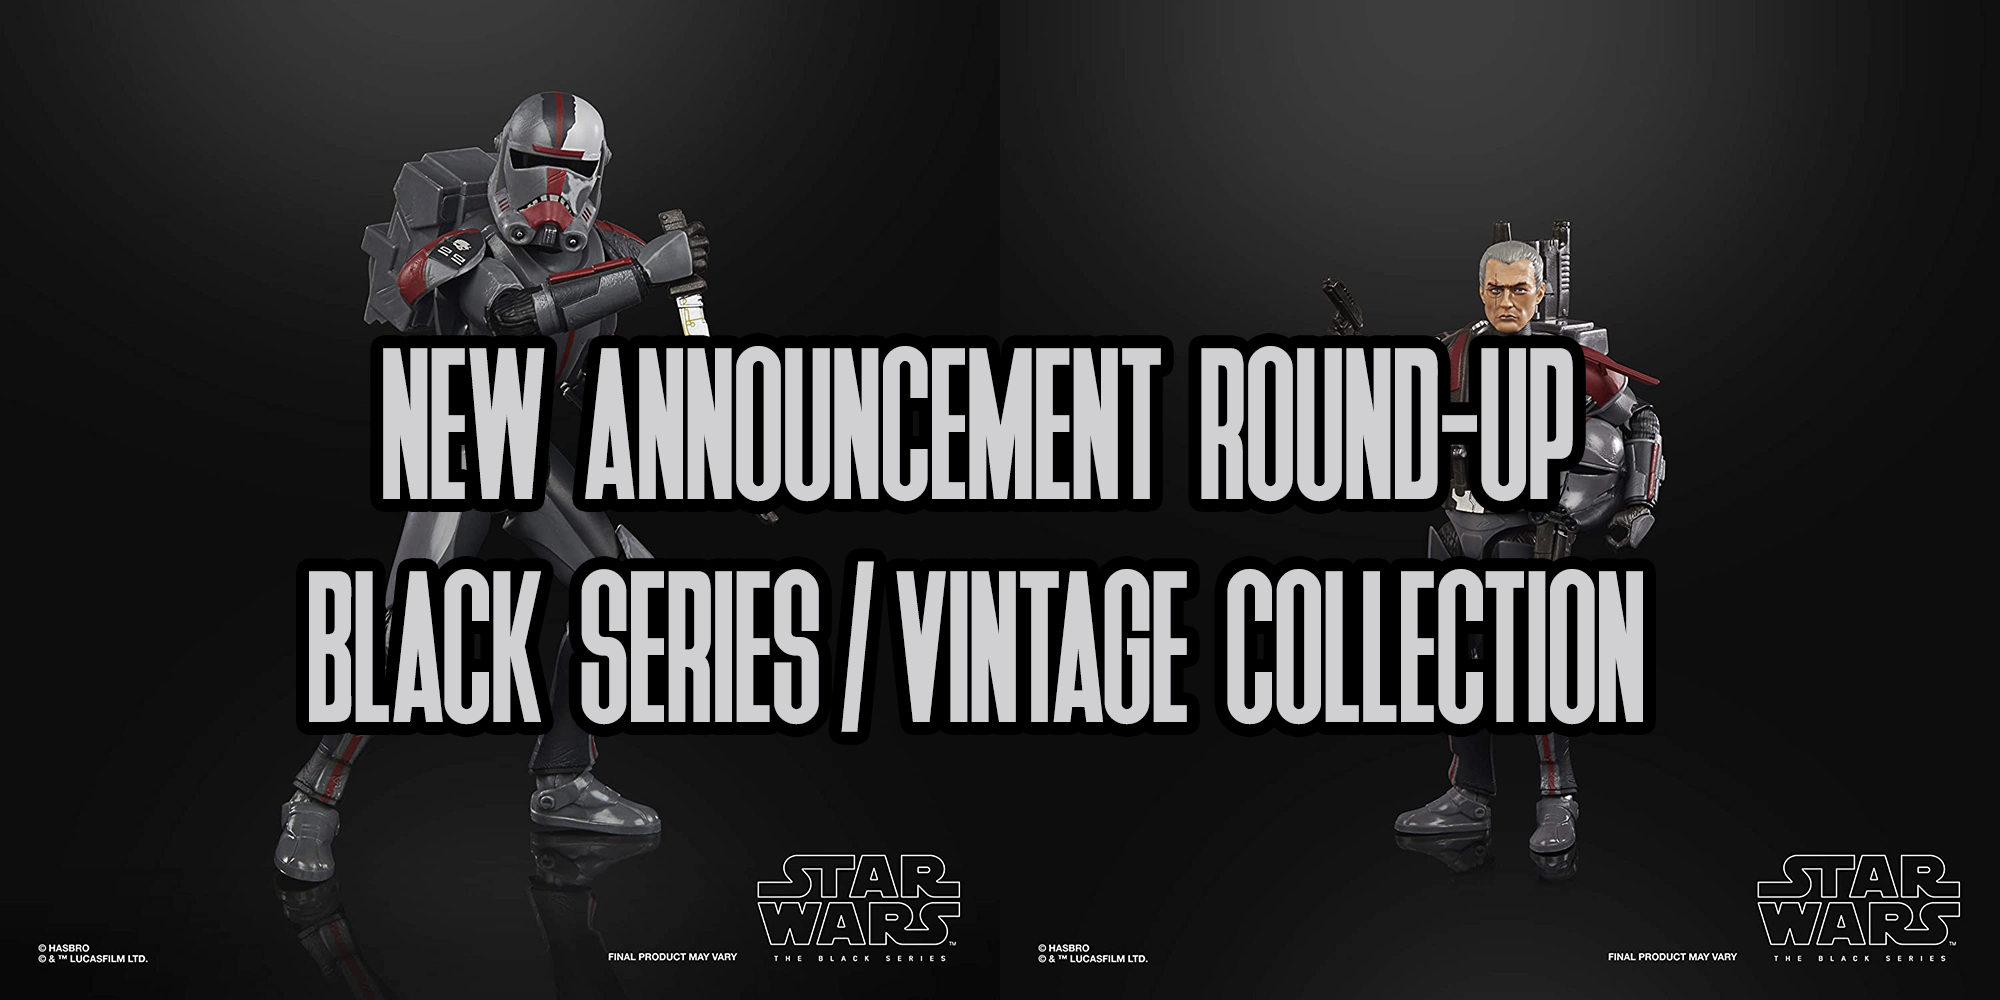 Today's Hasbro Black Series And Vintage Collection Announcements